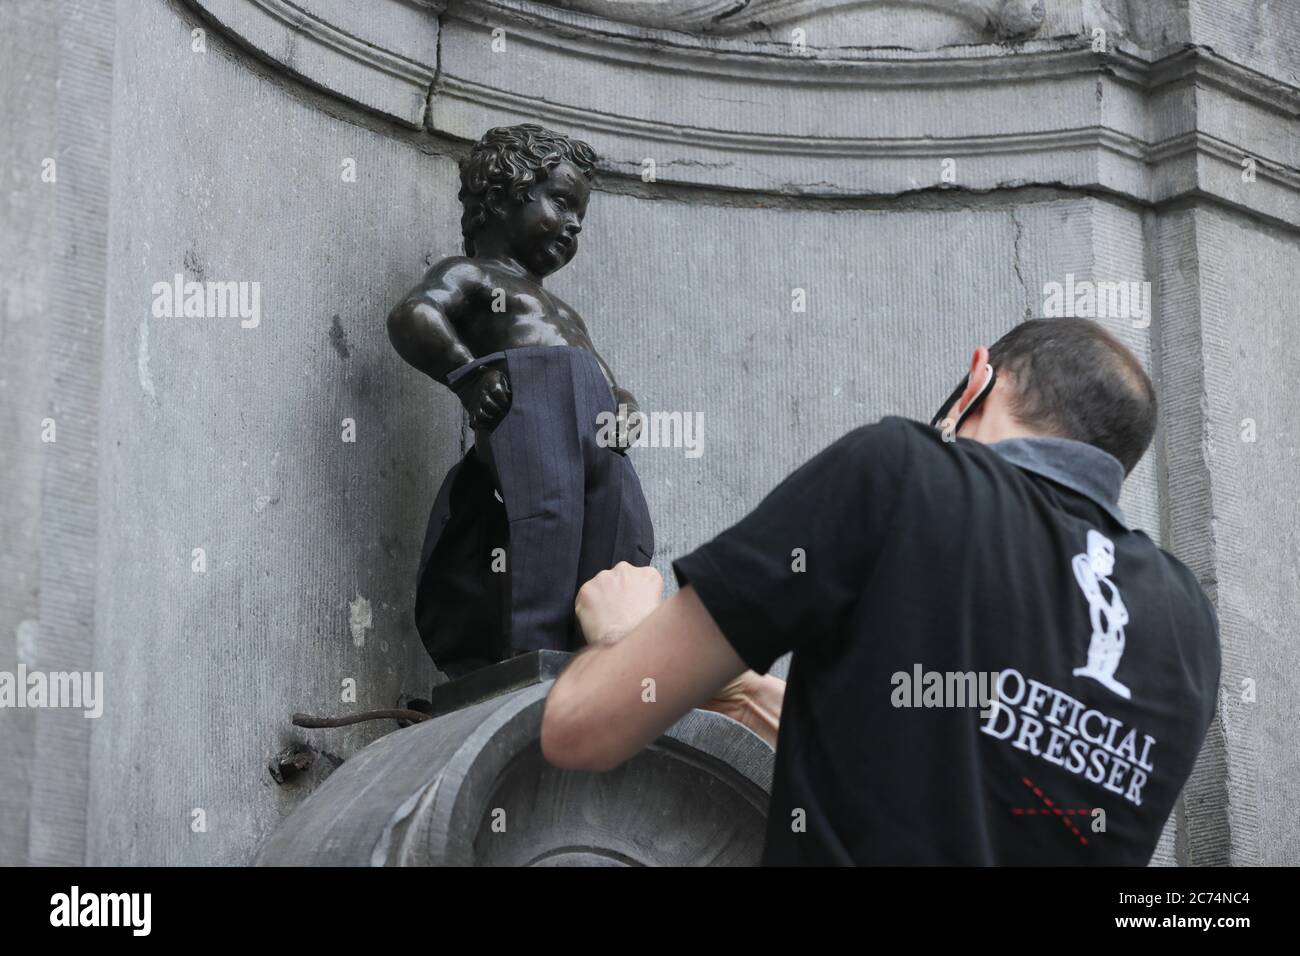 Brussels, Belgium. 14th July, 2020. An official dresser dresses the Manneken-Pis up in Brussels, Belgium, July 14, 2020. Manneken-Pis, the symbol of Brussels folklore, gets costumes at major events. He wore a suit with beret and baguette on Tuesday to commemorate the French national day which falls on July 14 every year. Credit: Zheng Huansong/Xinhua/Alamy Live News Stock Photo